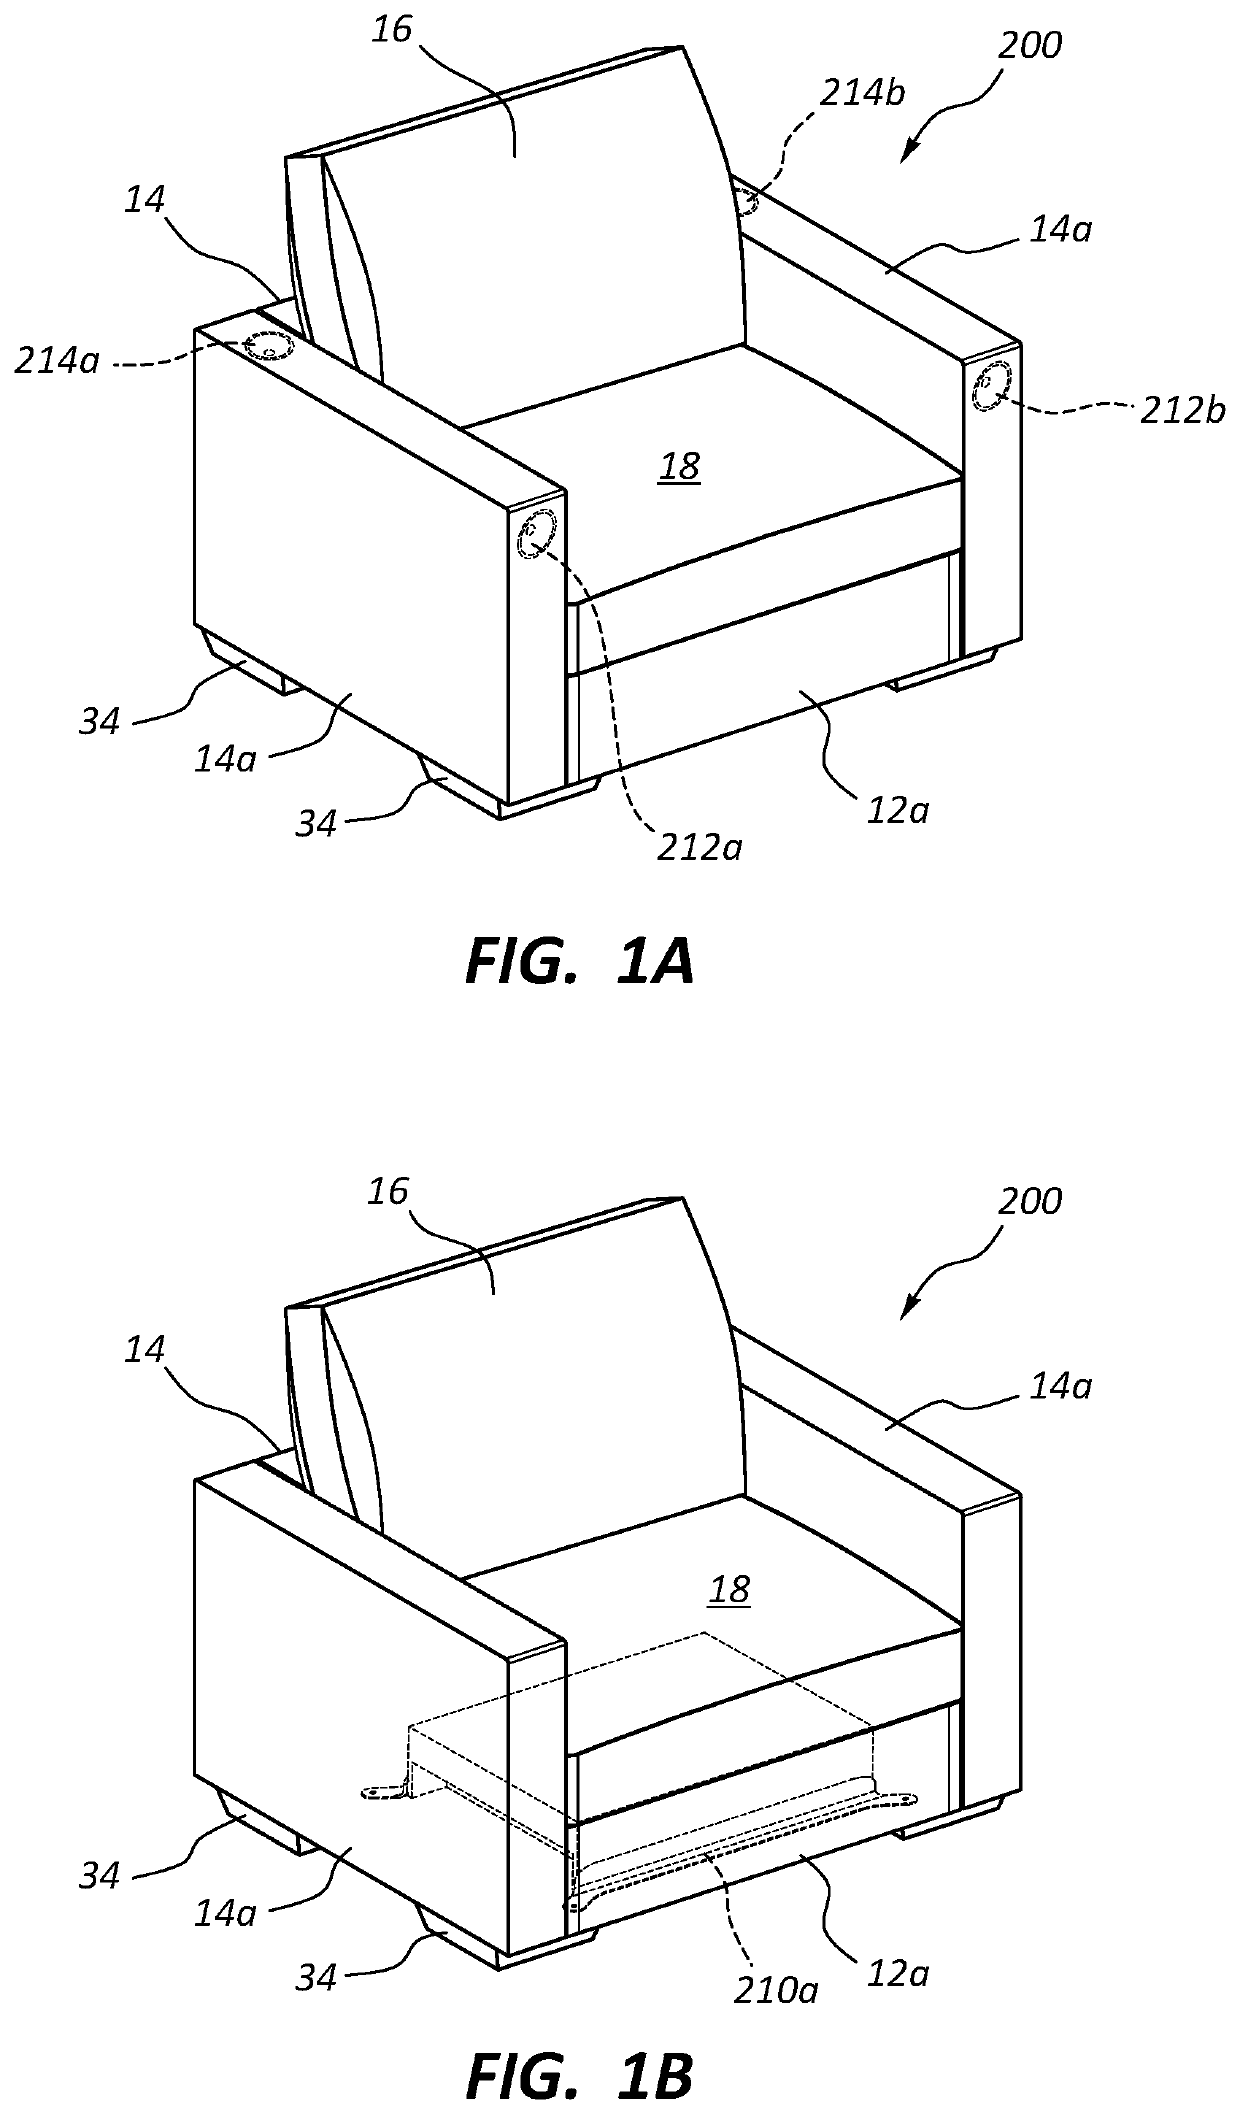 Modular furniture speaker assembly with reconfigurable transverse members